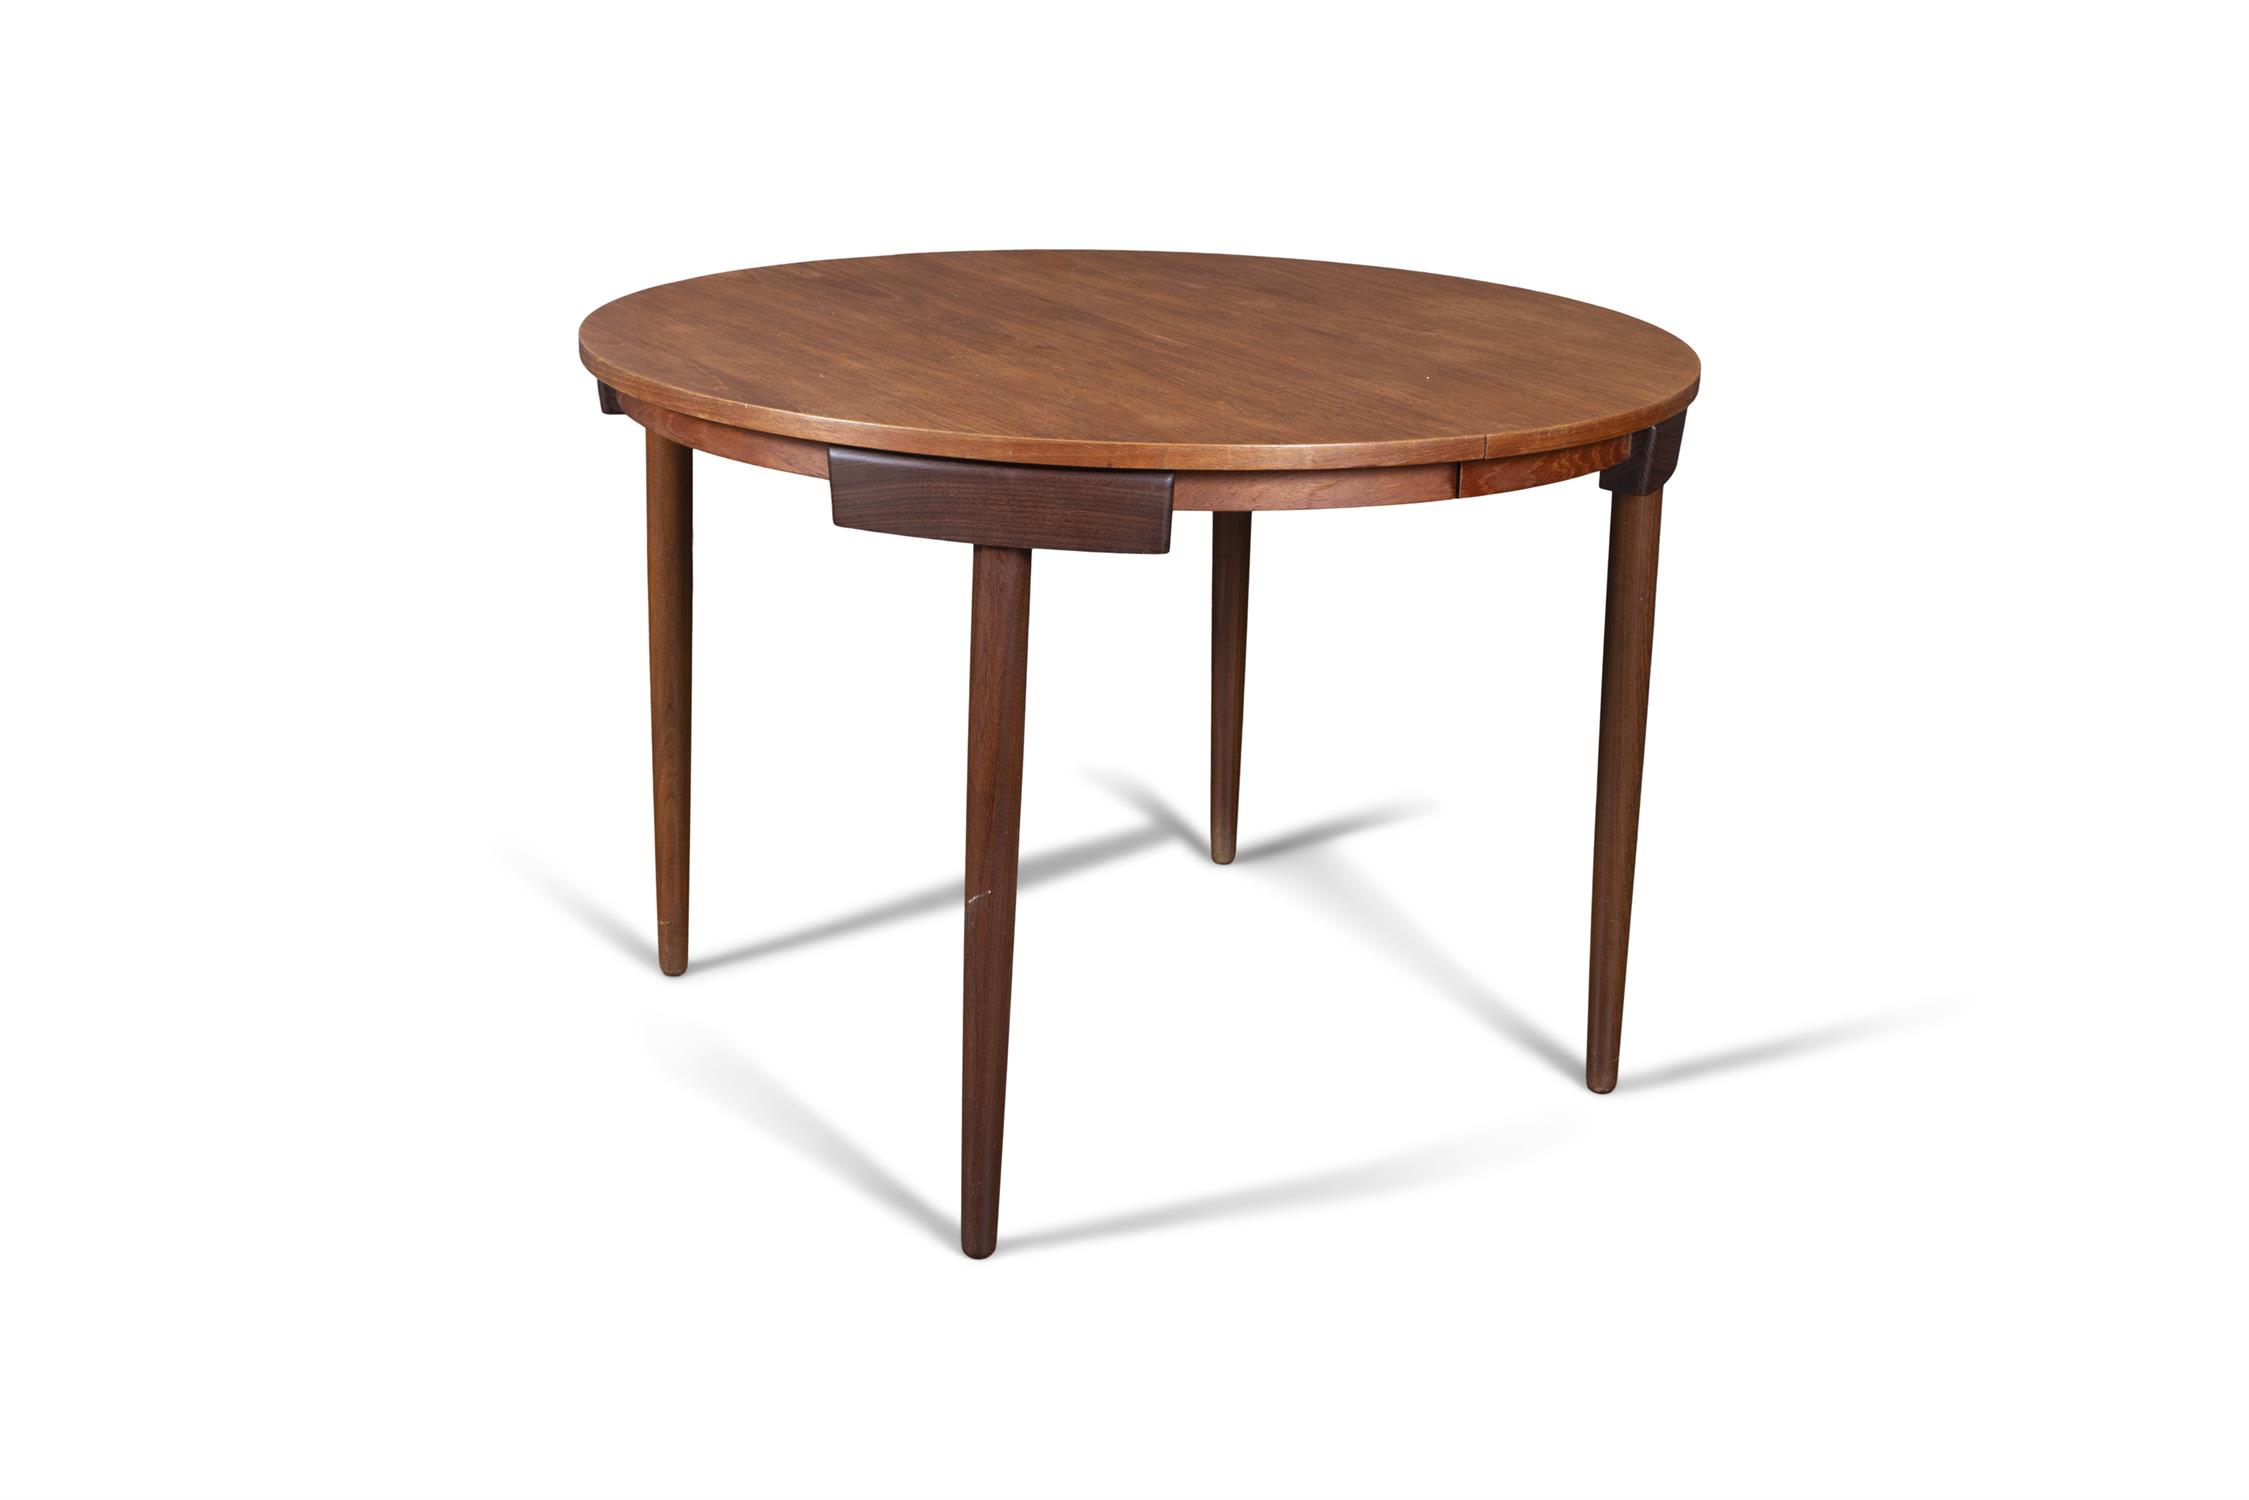 FREM ROJLE A teak circular extending dining table with 4 chairs by Hans Olsen for Frem Rojle. - Image 5 of 9